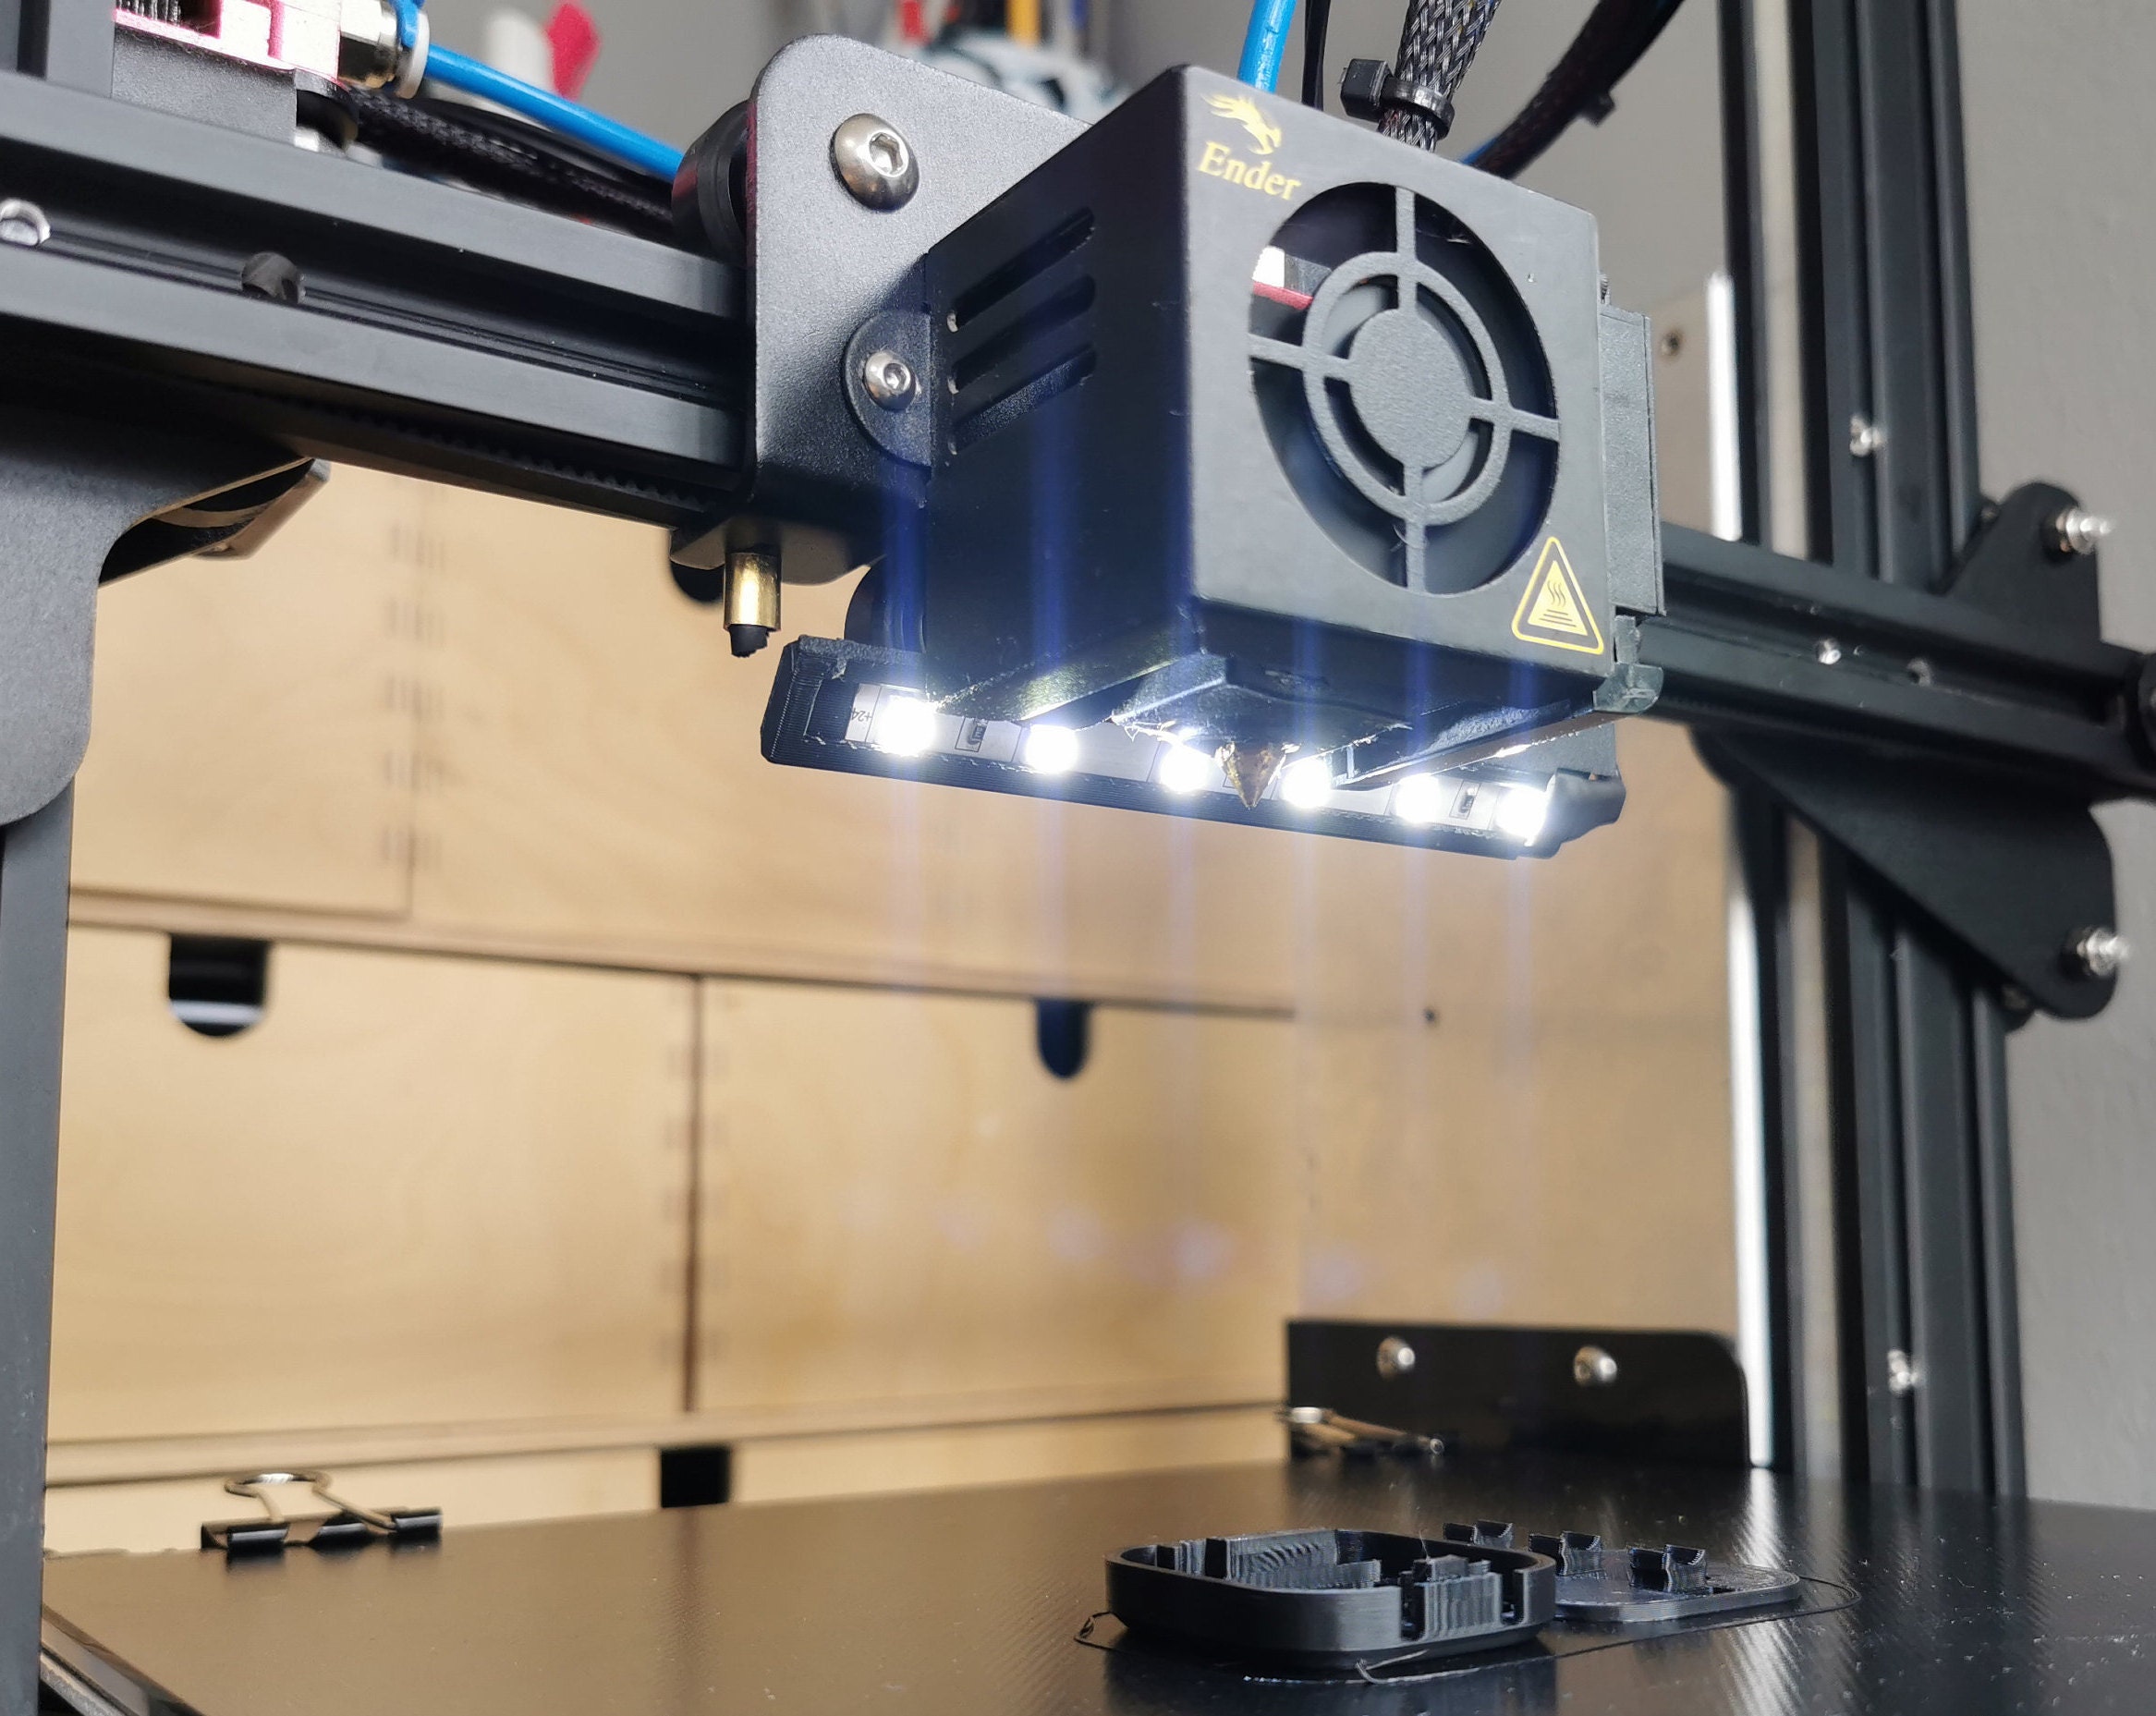 How to add LED light's to a 3D printer, Ender 3 